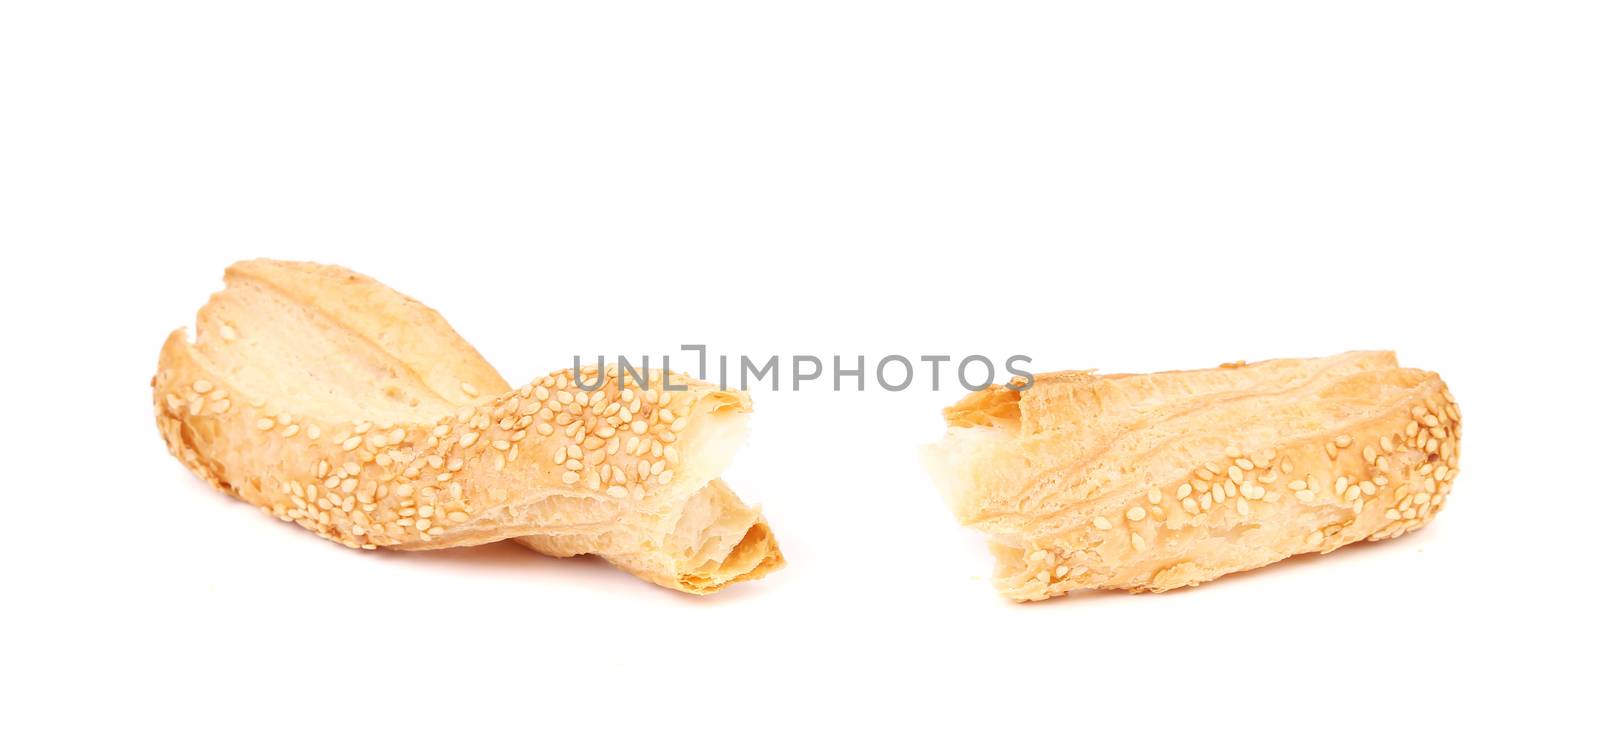 Cheese cracker with sesame. Isolated on a white background.